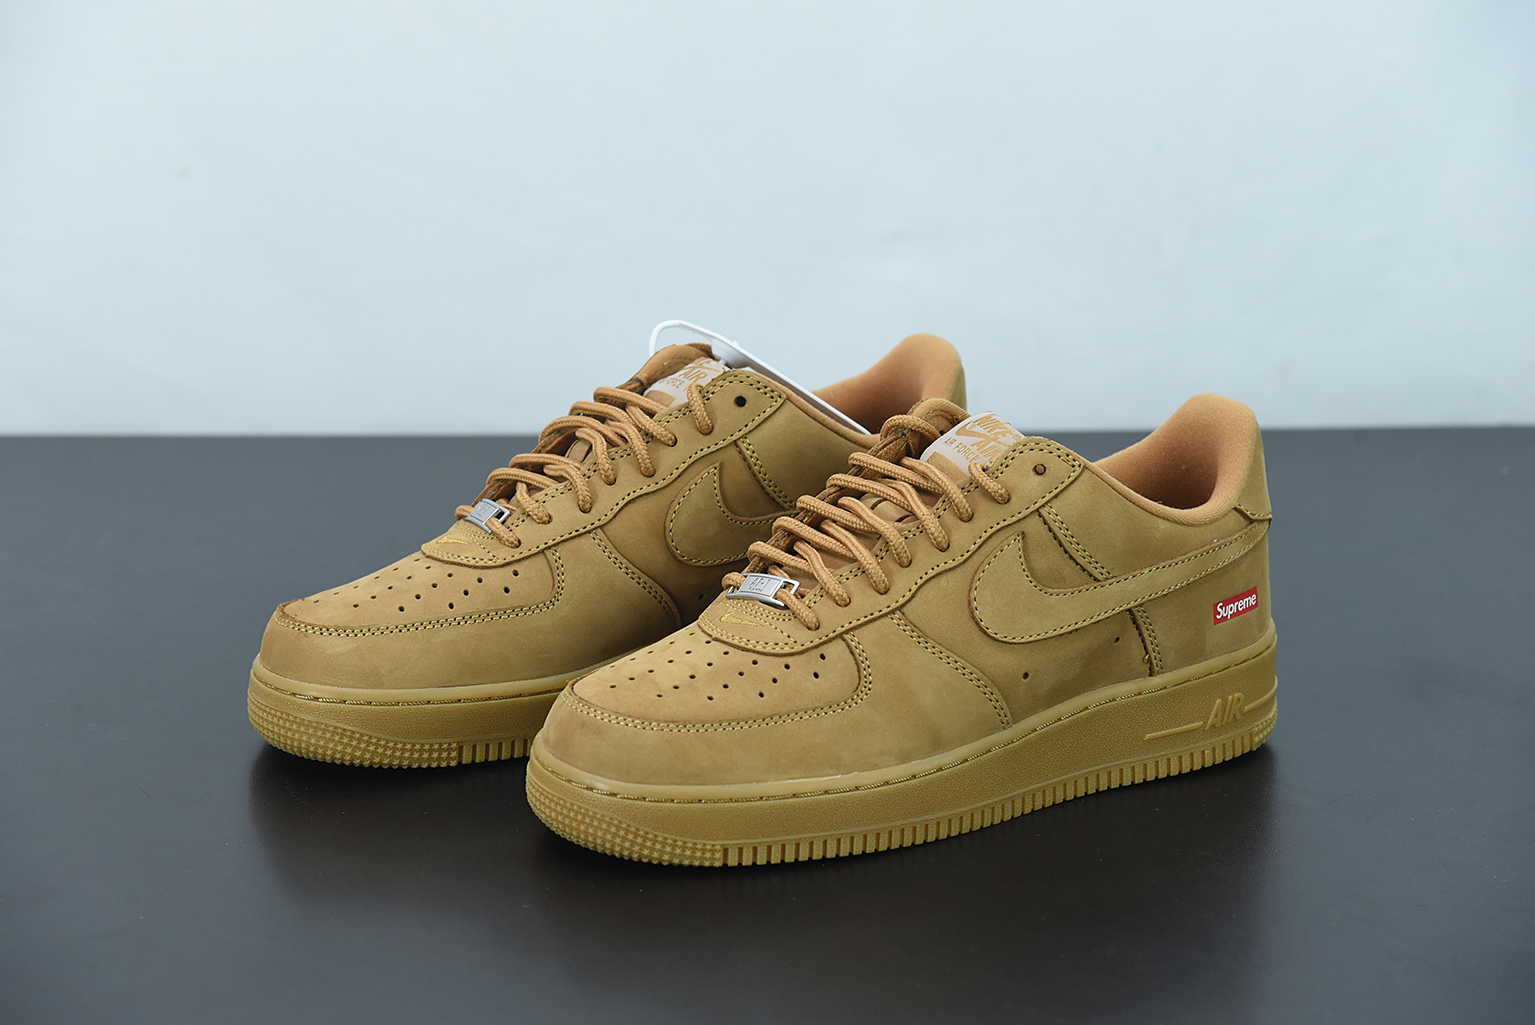 Supreme x Nike Air Force 1 “Flax” For Sale Fit Sporting Goods